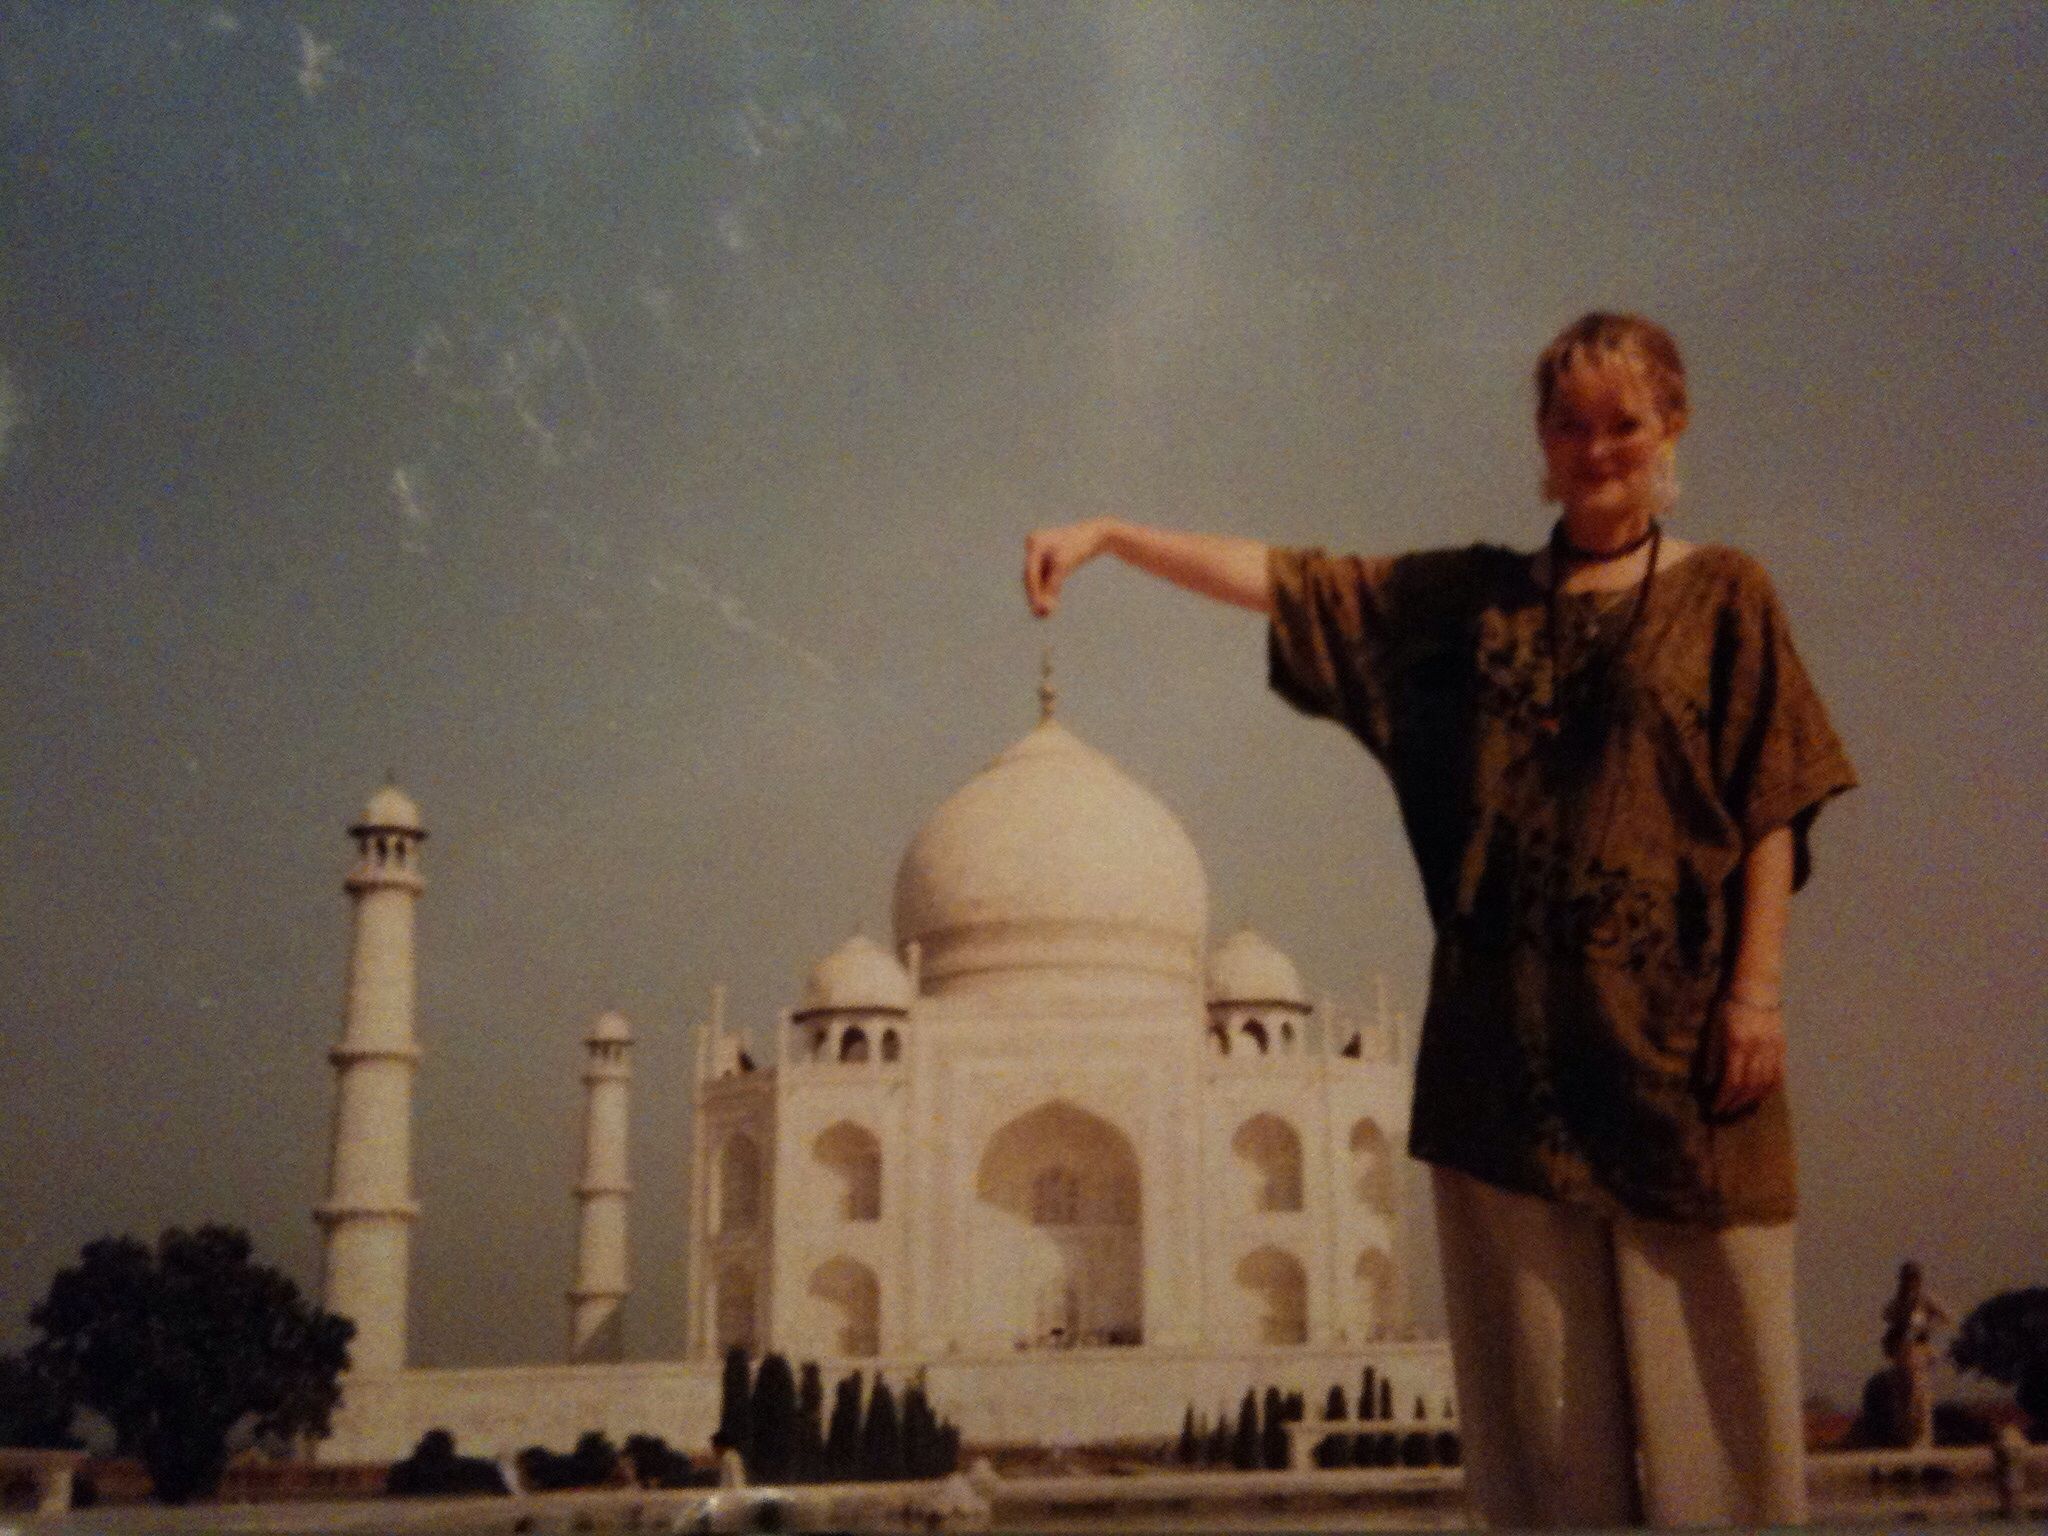 1994 - Taj Mahal, India - Traveling around India, here I'm doing the famous optical illusion, of grabbing the point.